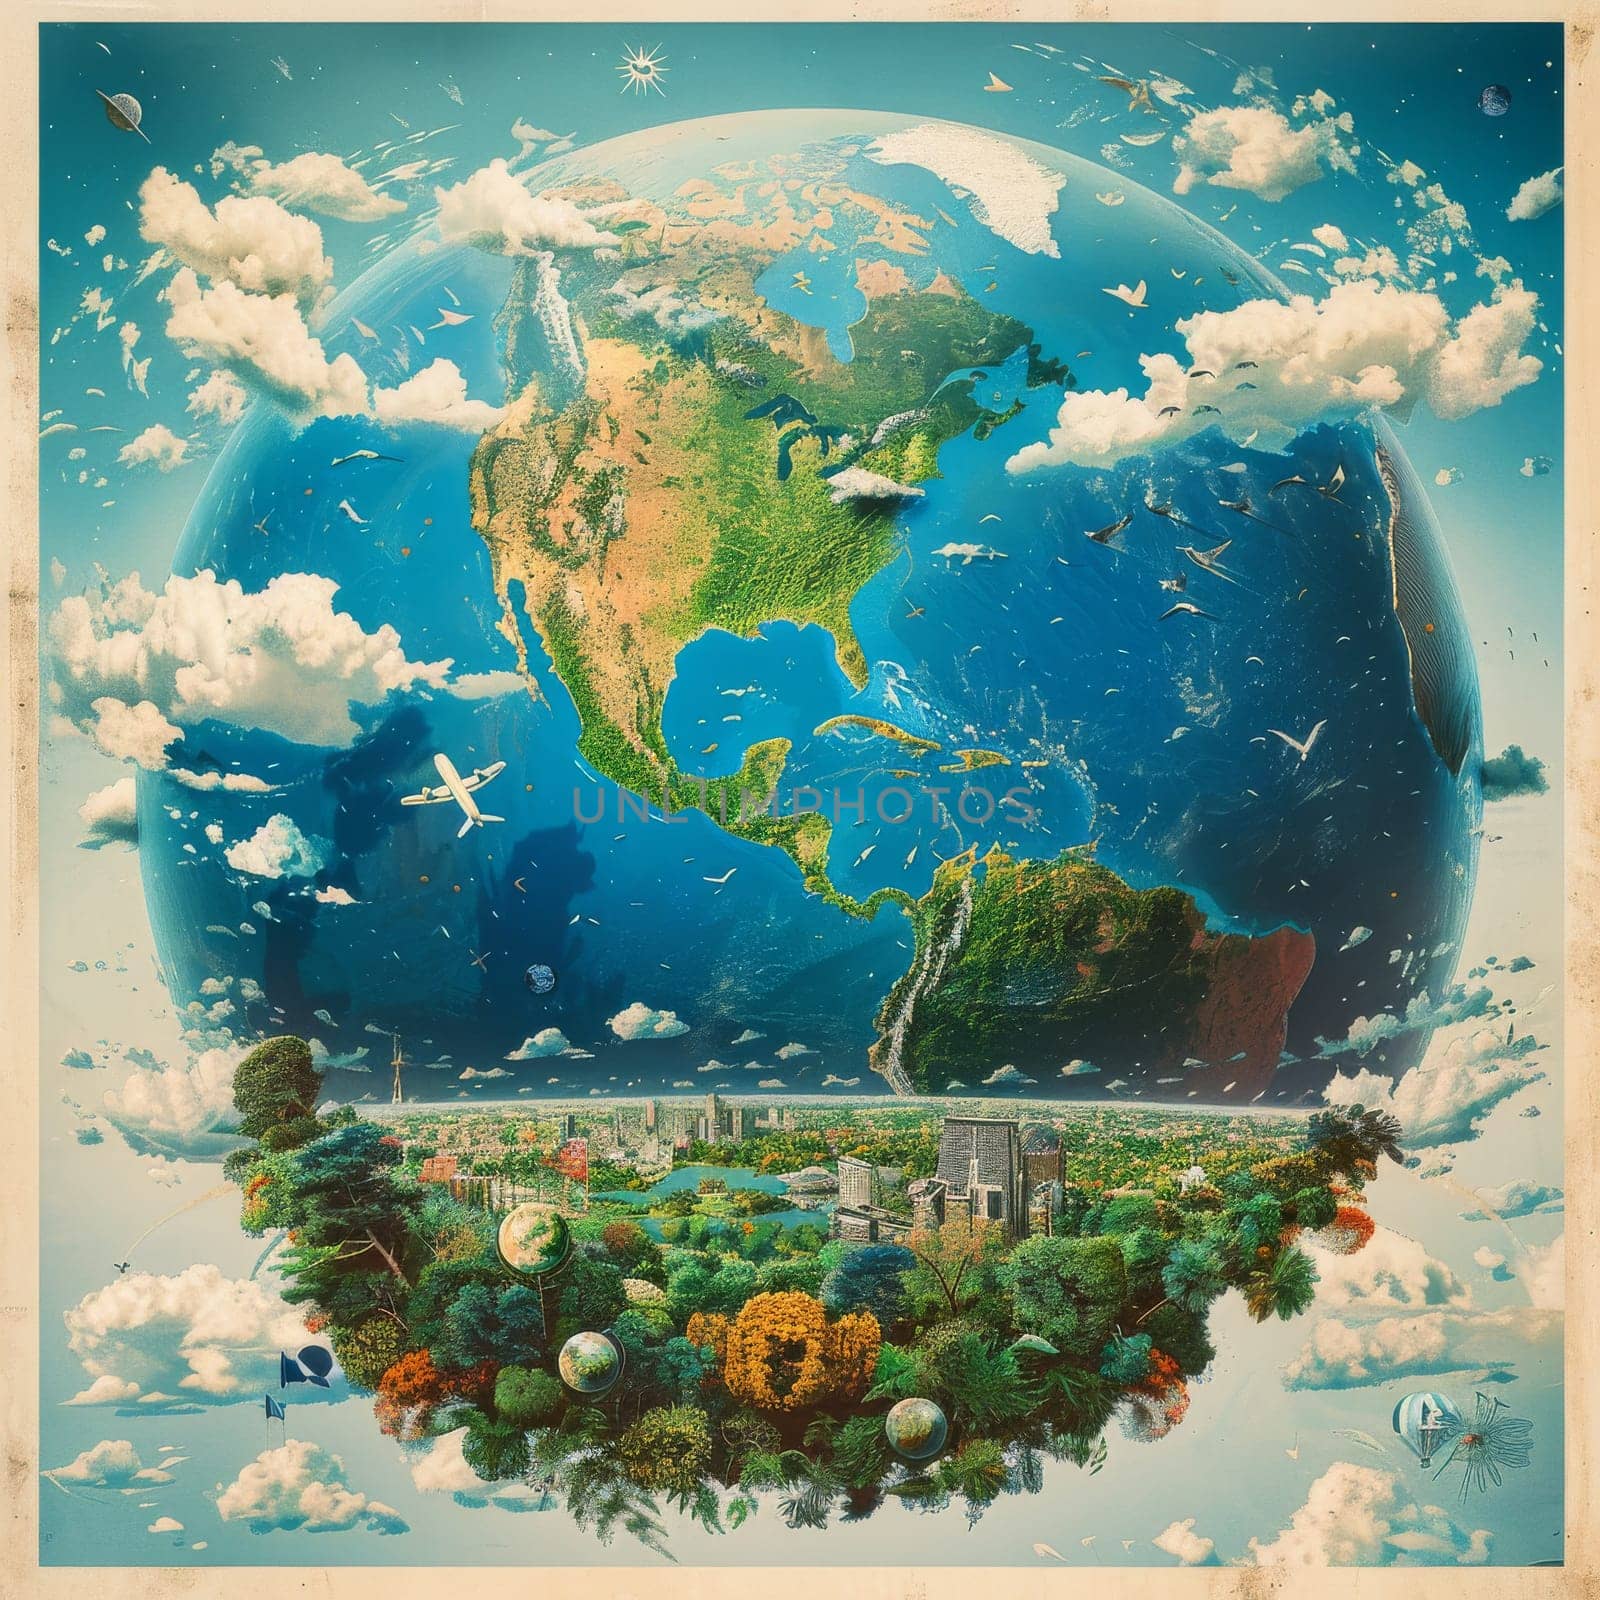 A colorful painting of the earth with a city in the middle. The painting is titled The Earth and is a representation of the planet's beauty and diversity